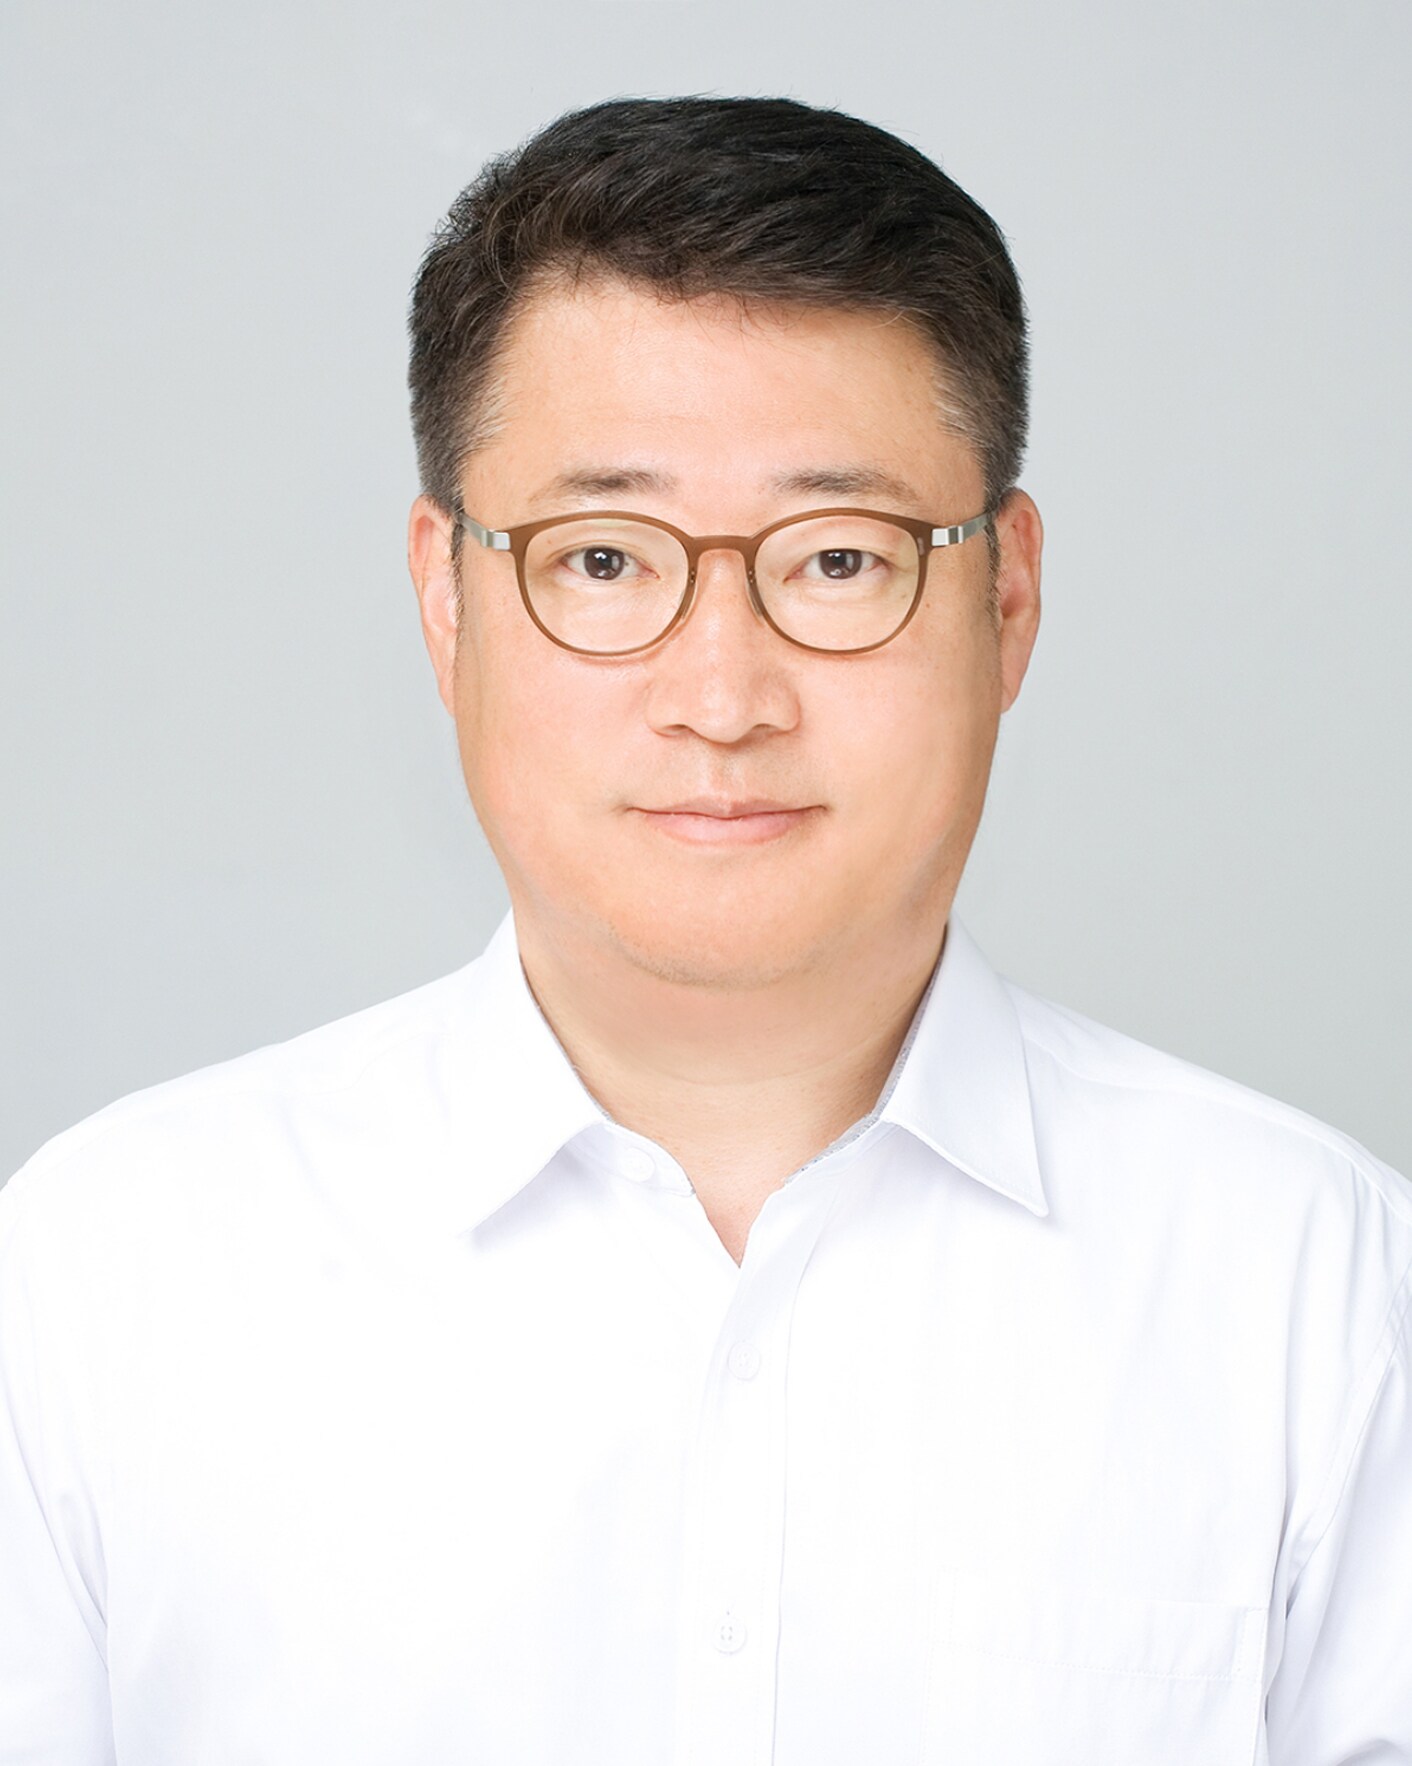 Hankook Networks appoints Youngmin Cho as Chief Executive Officer